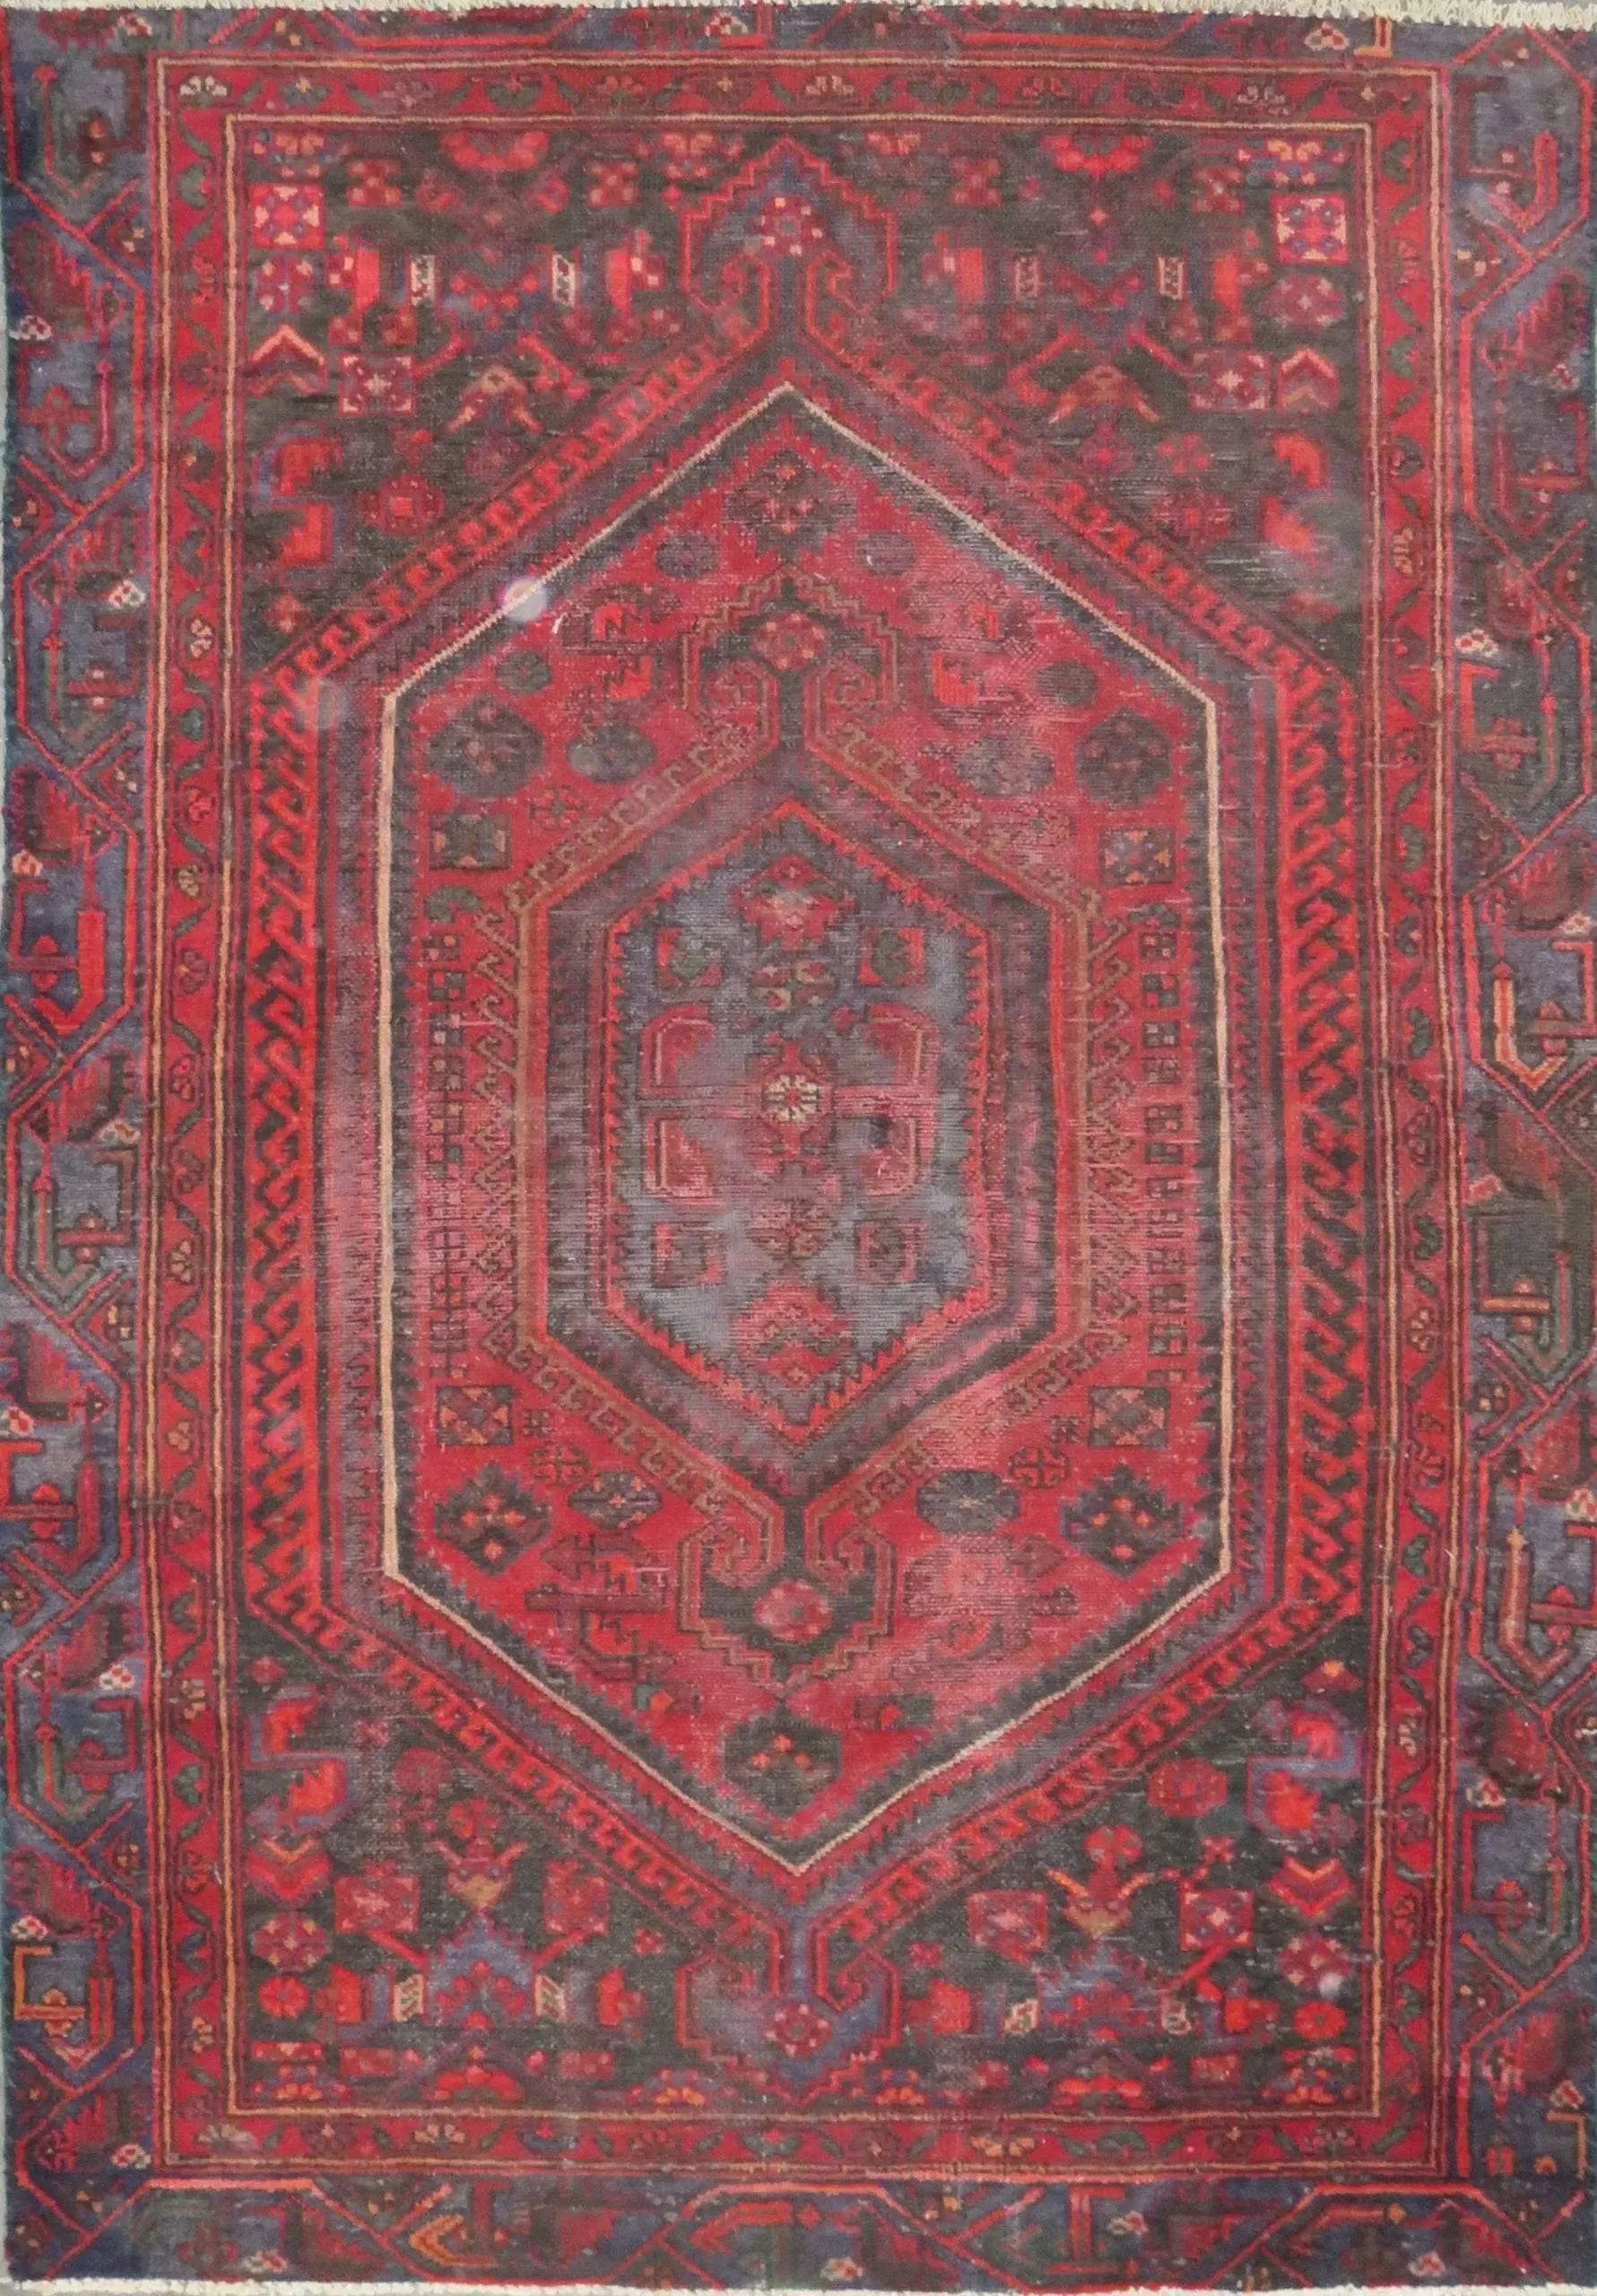 Hand-Knotted Persian Wool Rug _ Luxurious Vintage Design, 6'1" x 3'9", Artisan Crafted